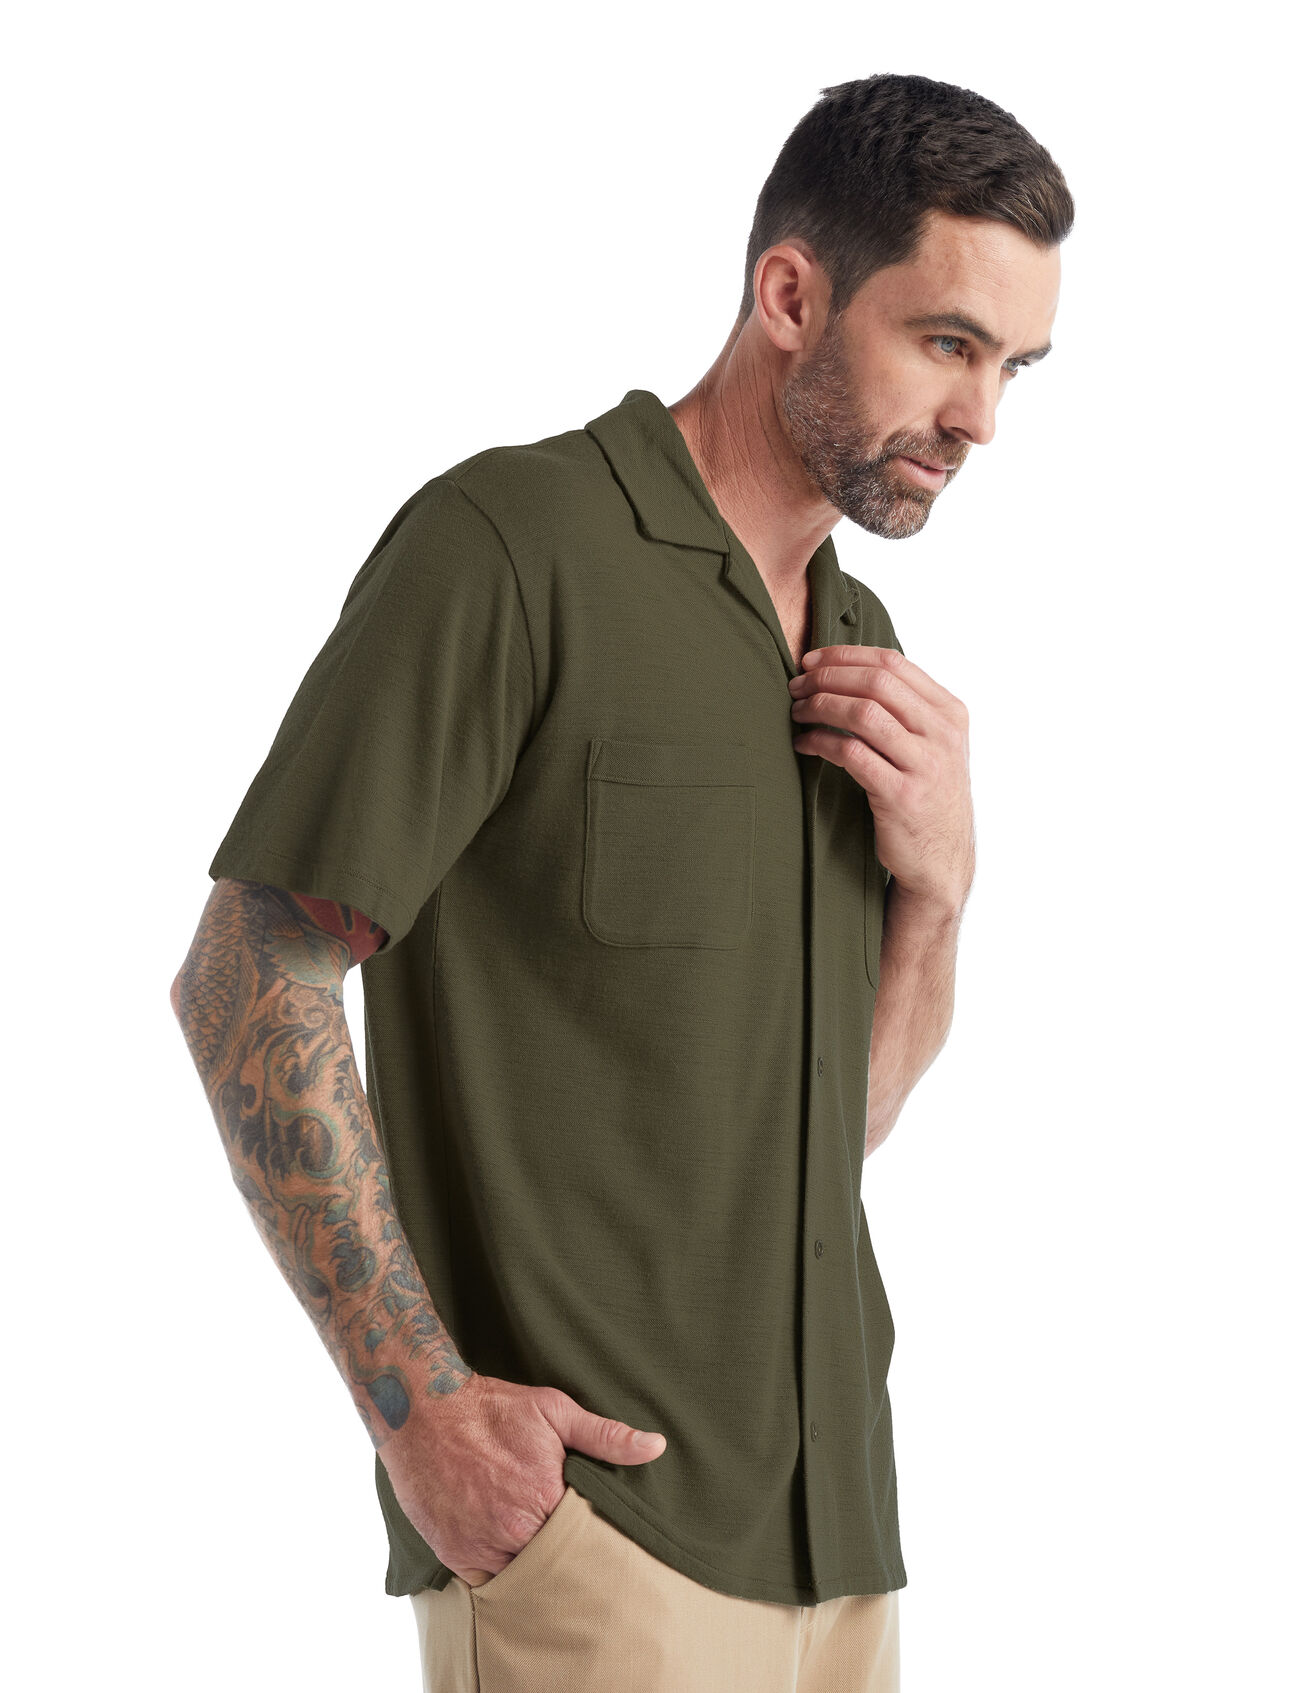 Mens Merino Pankow Short Sleeve Shirt A stylish button-up shirt with the comfort and breathability of 100% merino wool, the Pankow Short Sleeve Shirt offers all-natural, everyday versatility.